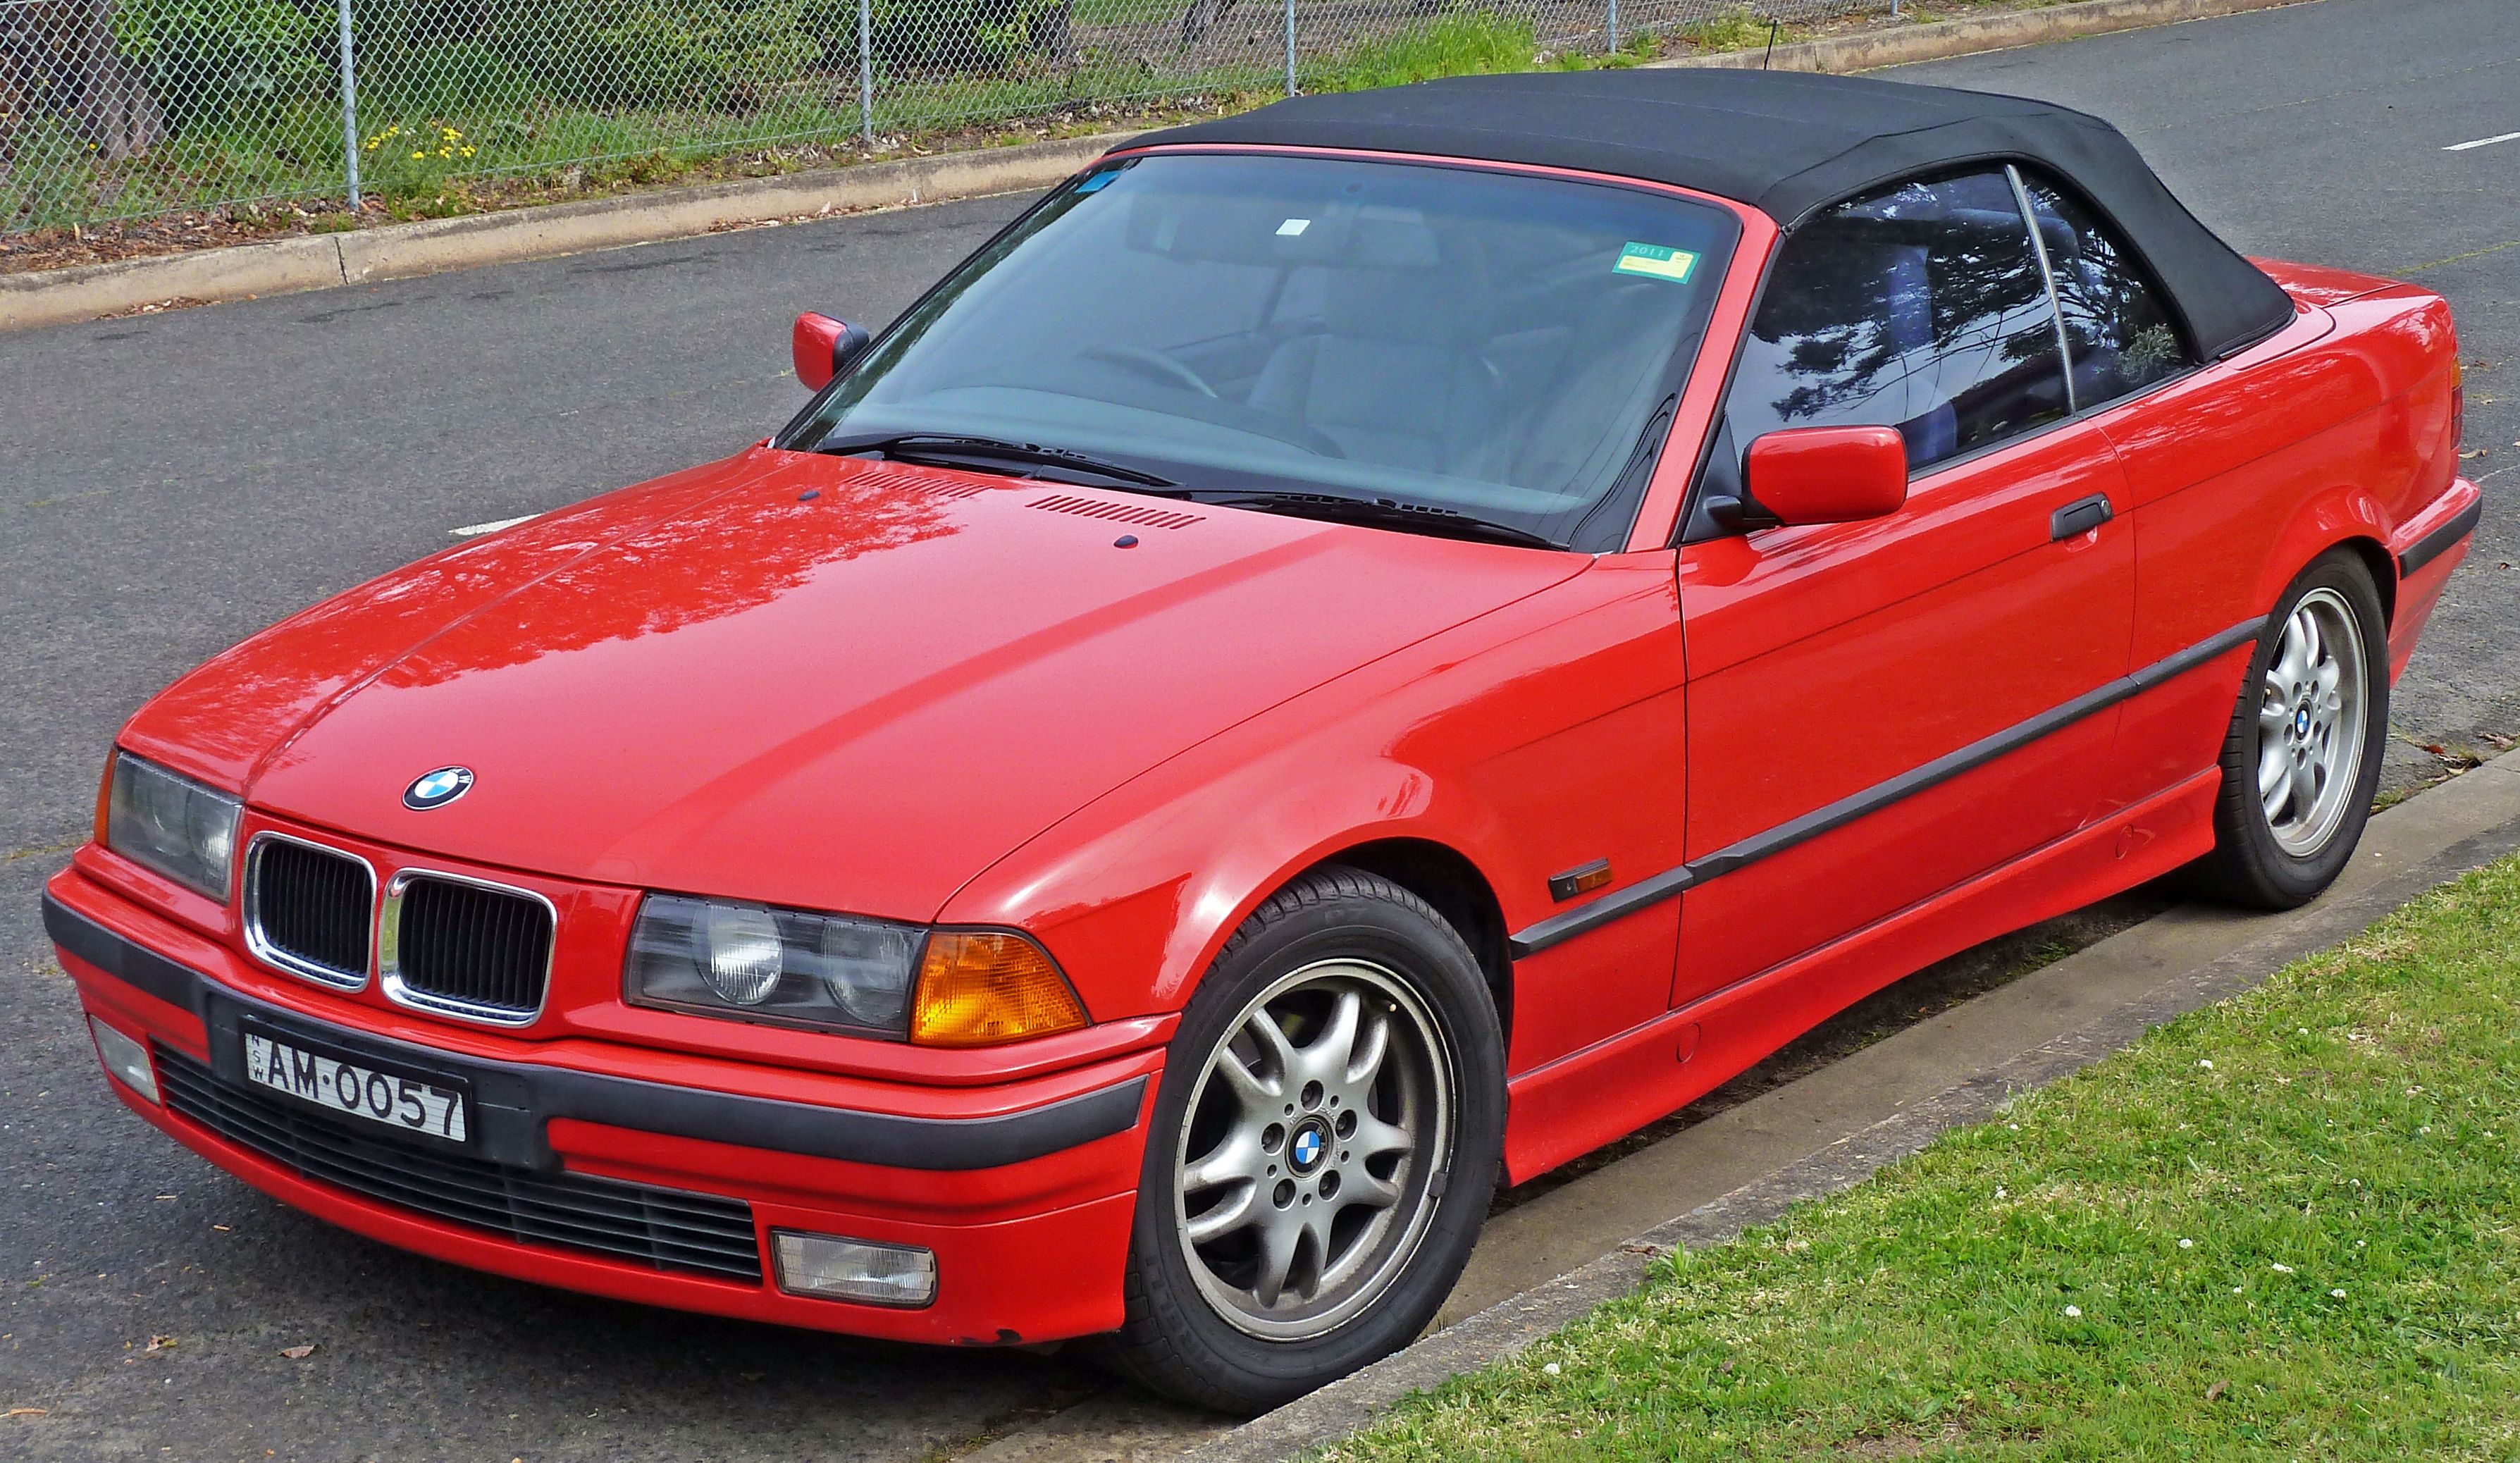 red BMW 3-Series (E36) on the road